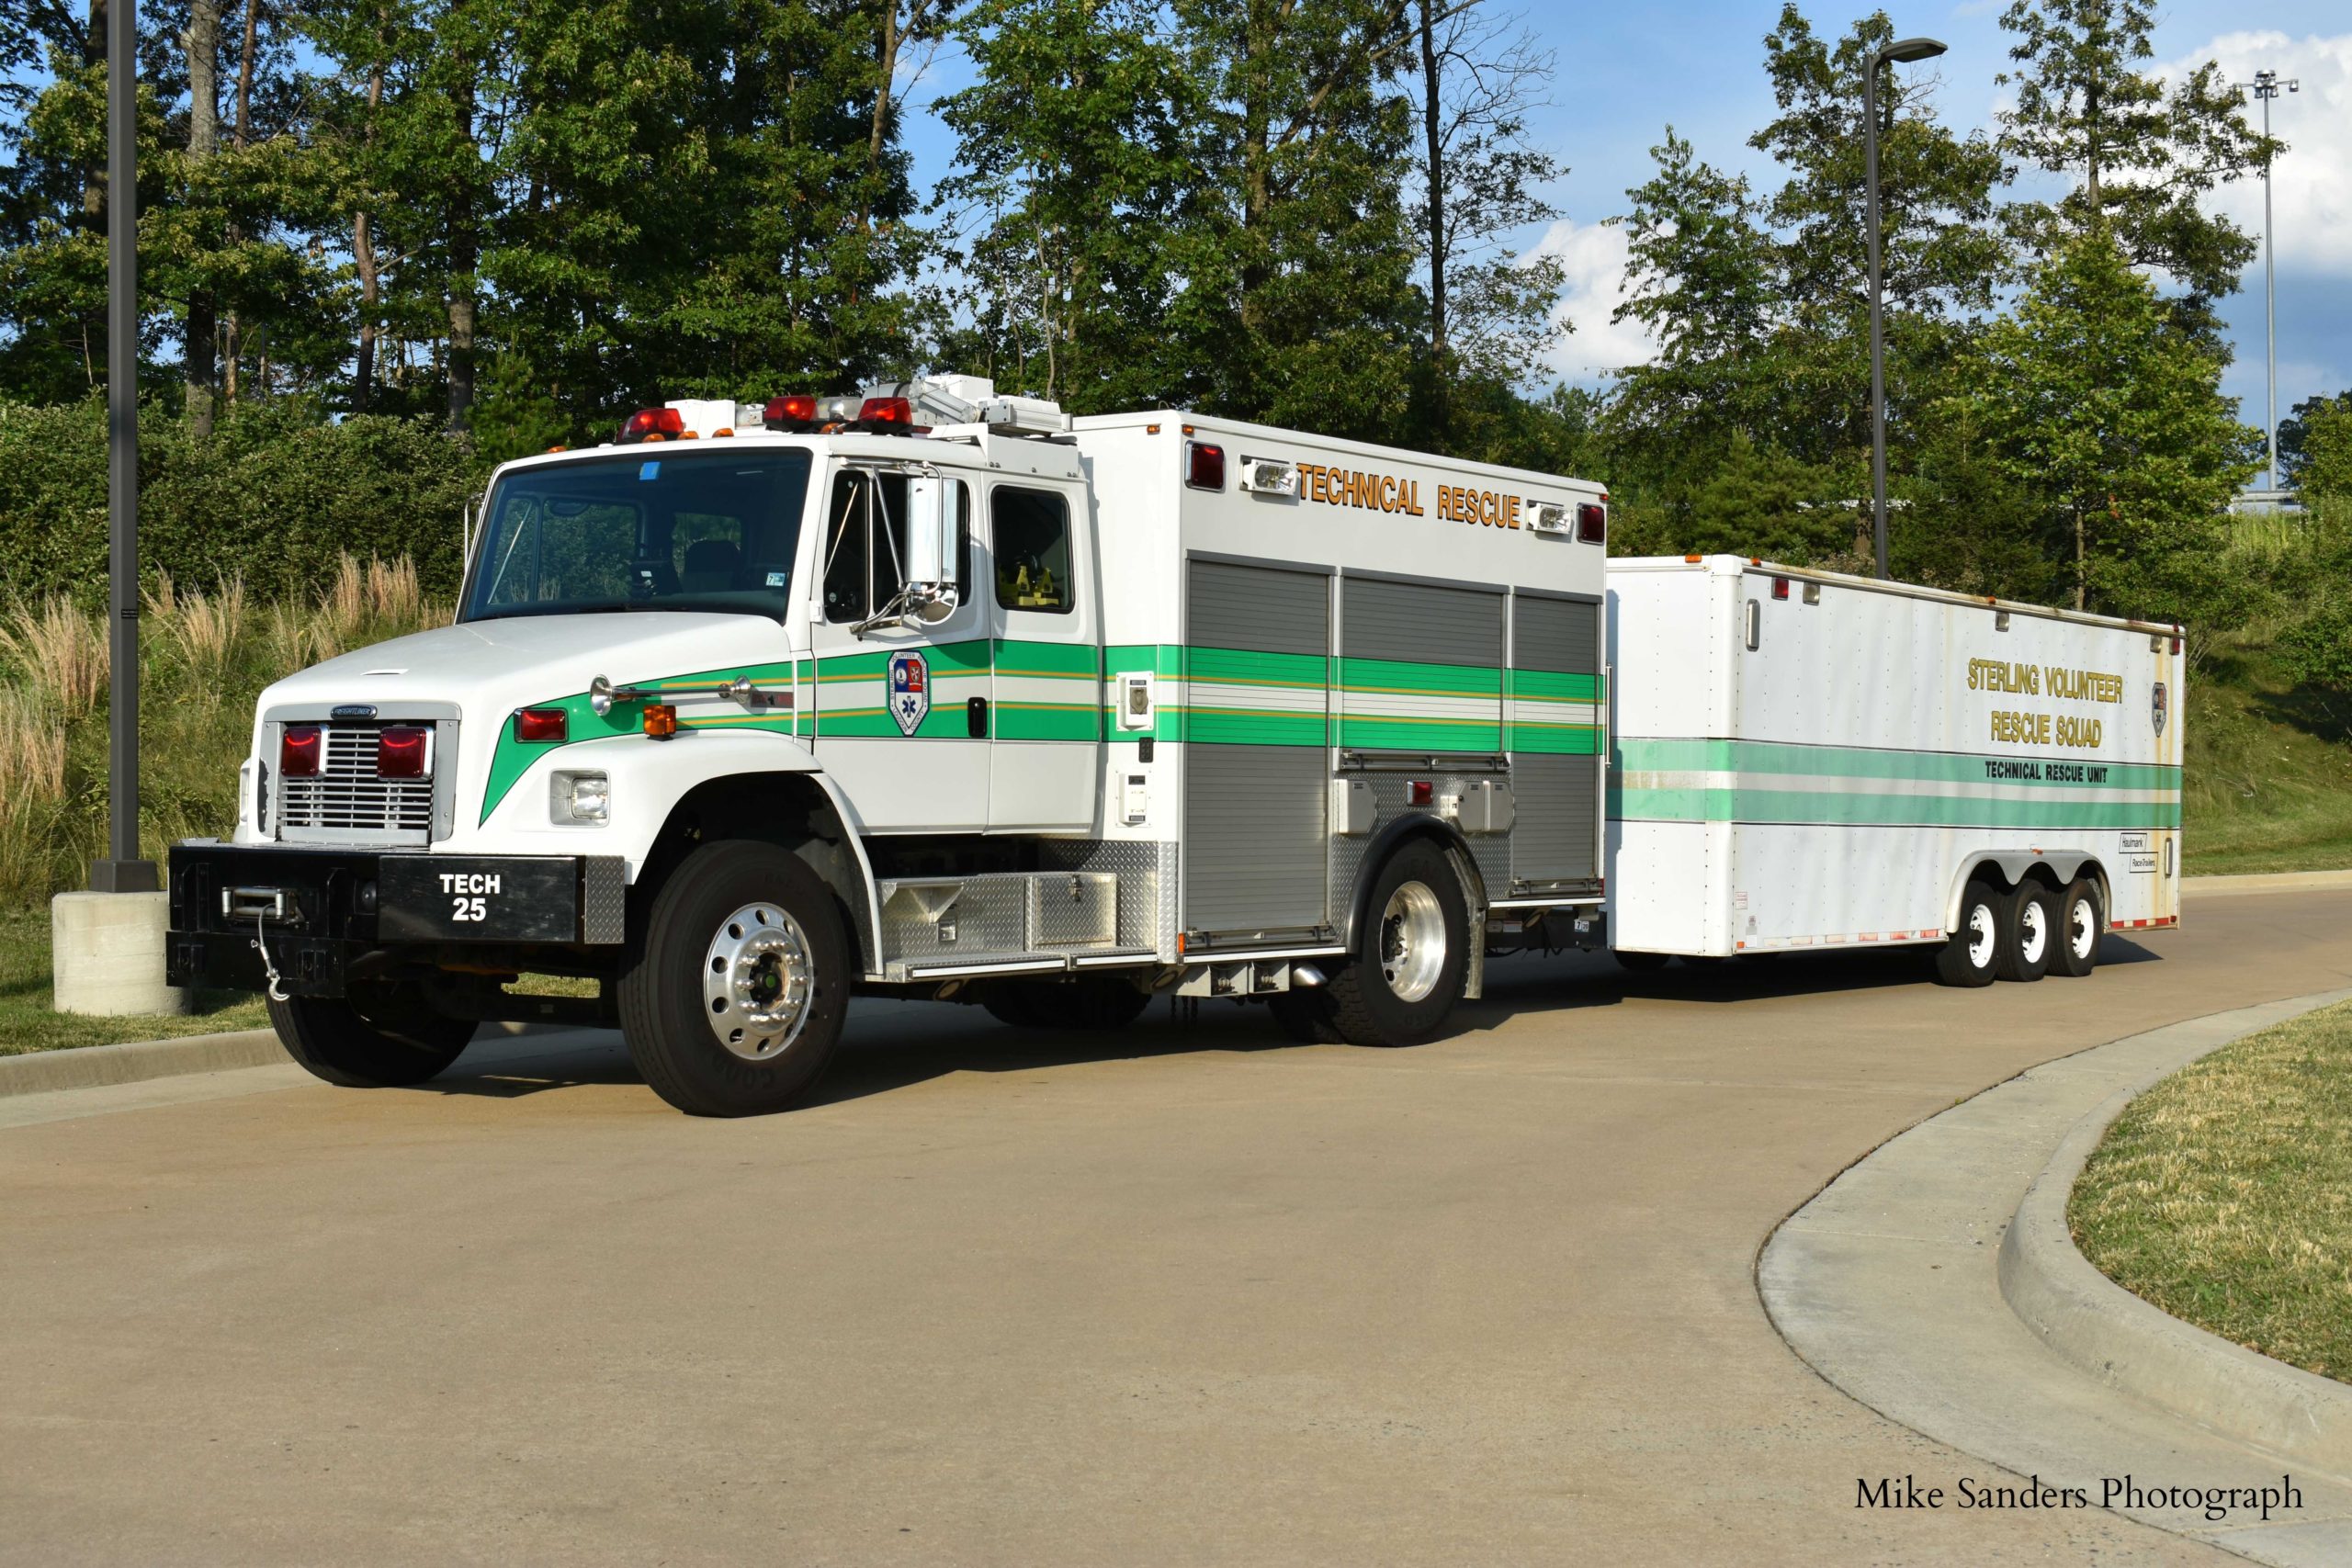 Technical Rescue truck, 2004 Freightliner 70/ American LaFrance (Medic Master)